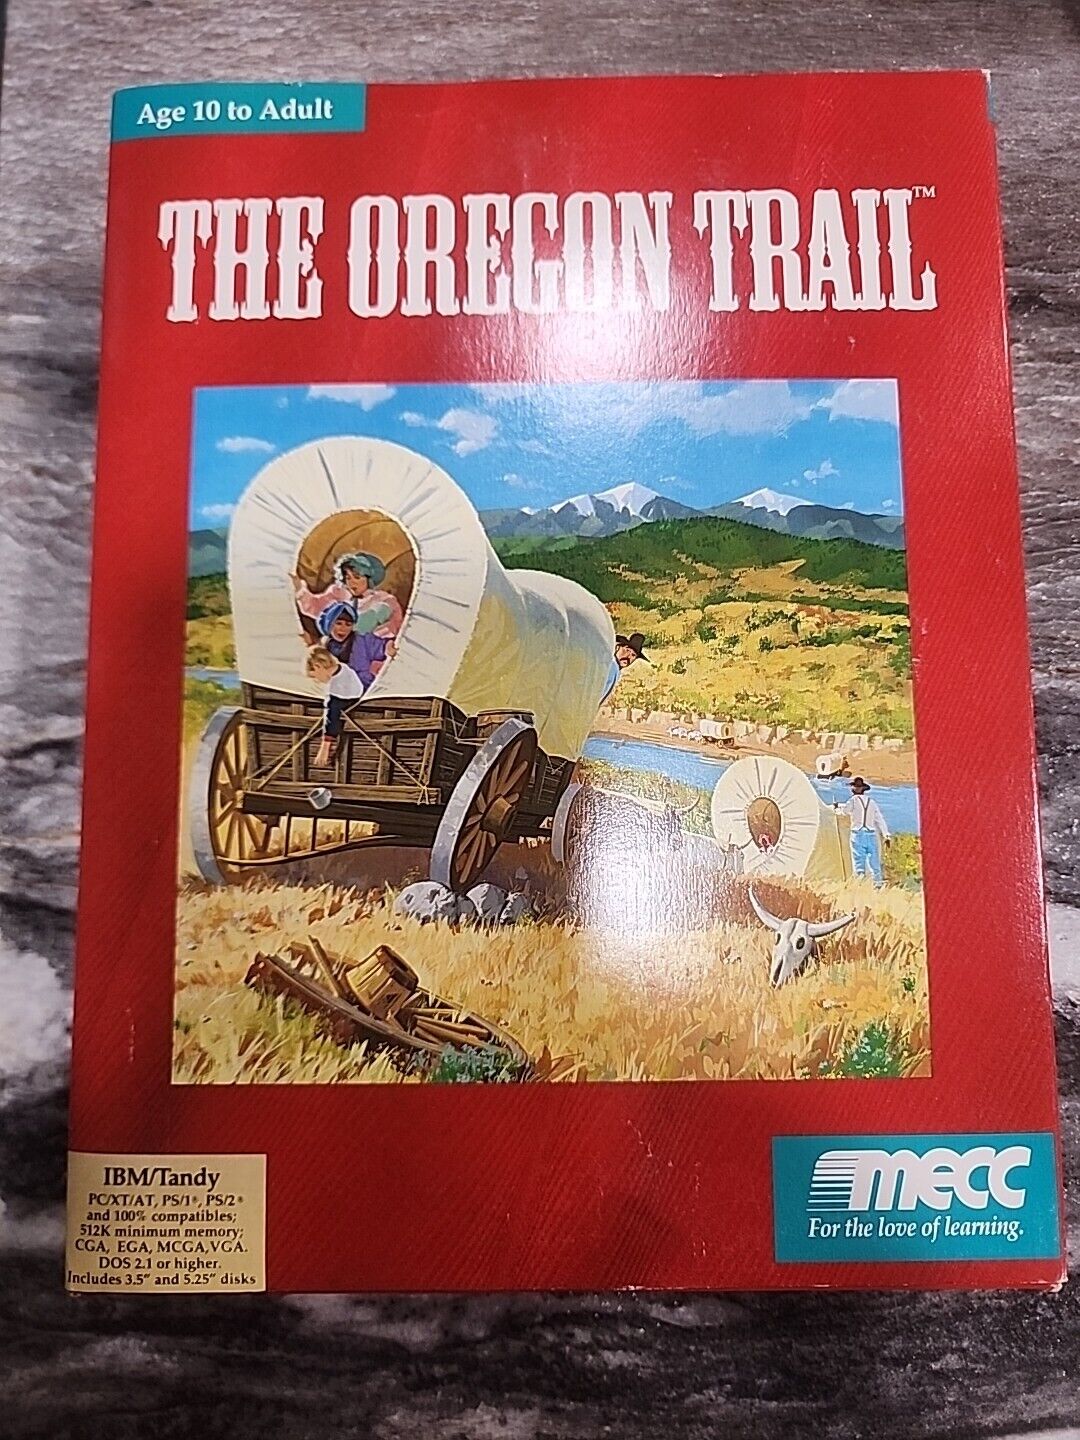 Vintage Oregon Trail 2.1 by MECC for IBM PC Tandy 1000 Floppy Disks & Guide